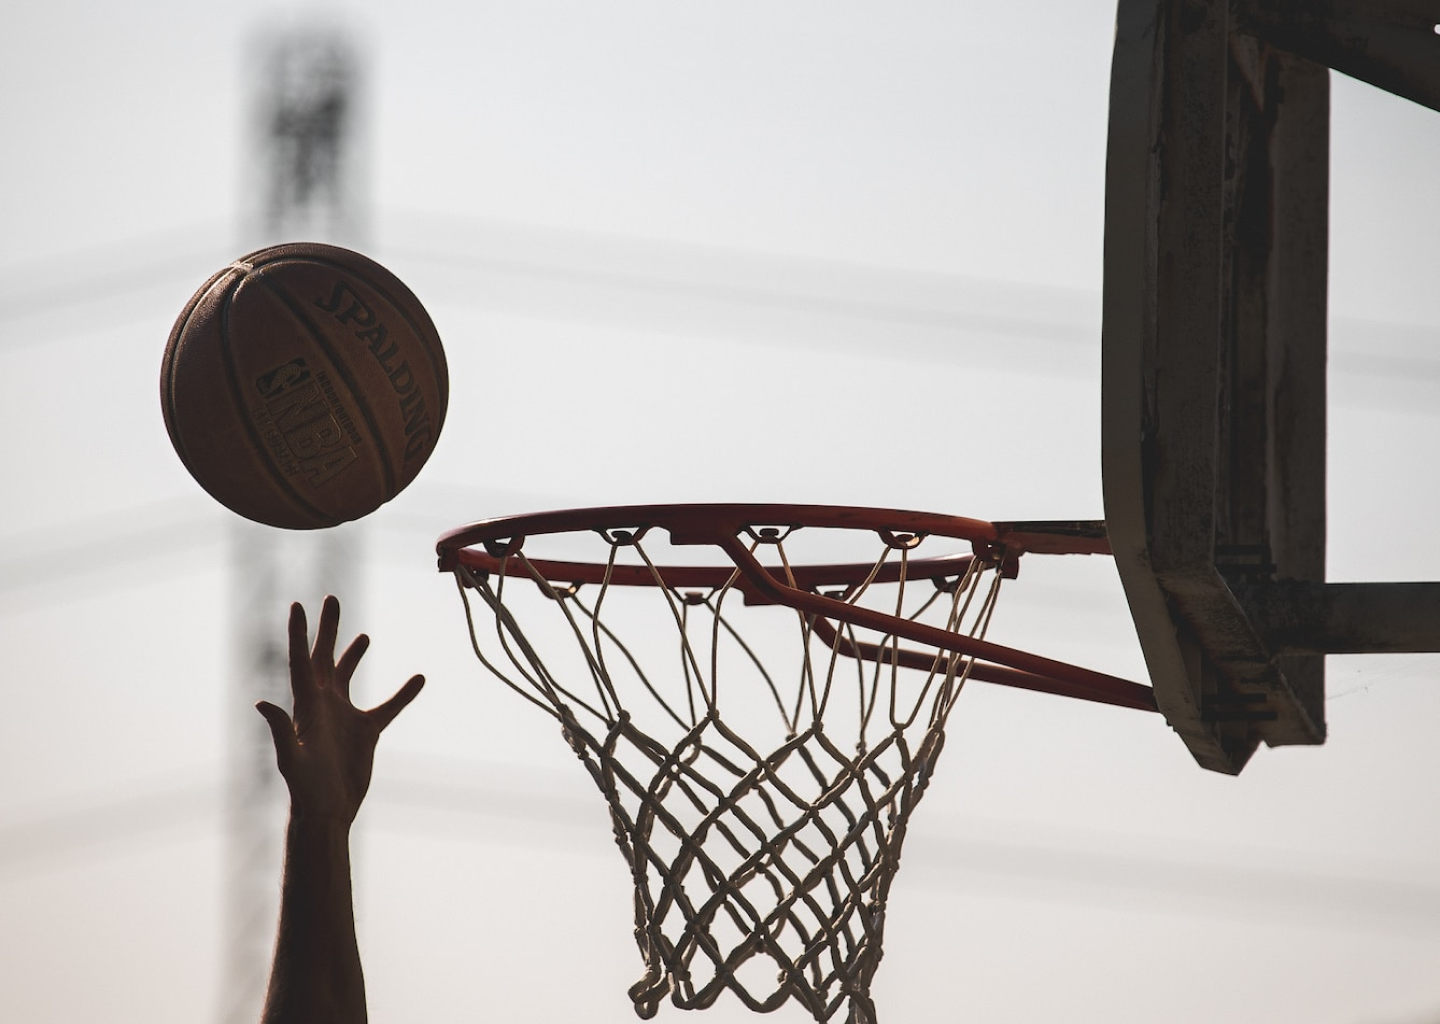 A hand reaches up for a basketball. The basketball is in the air next to a basketball hoop.